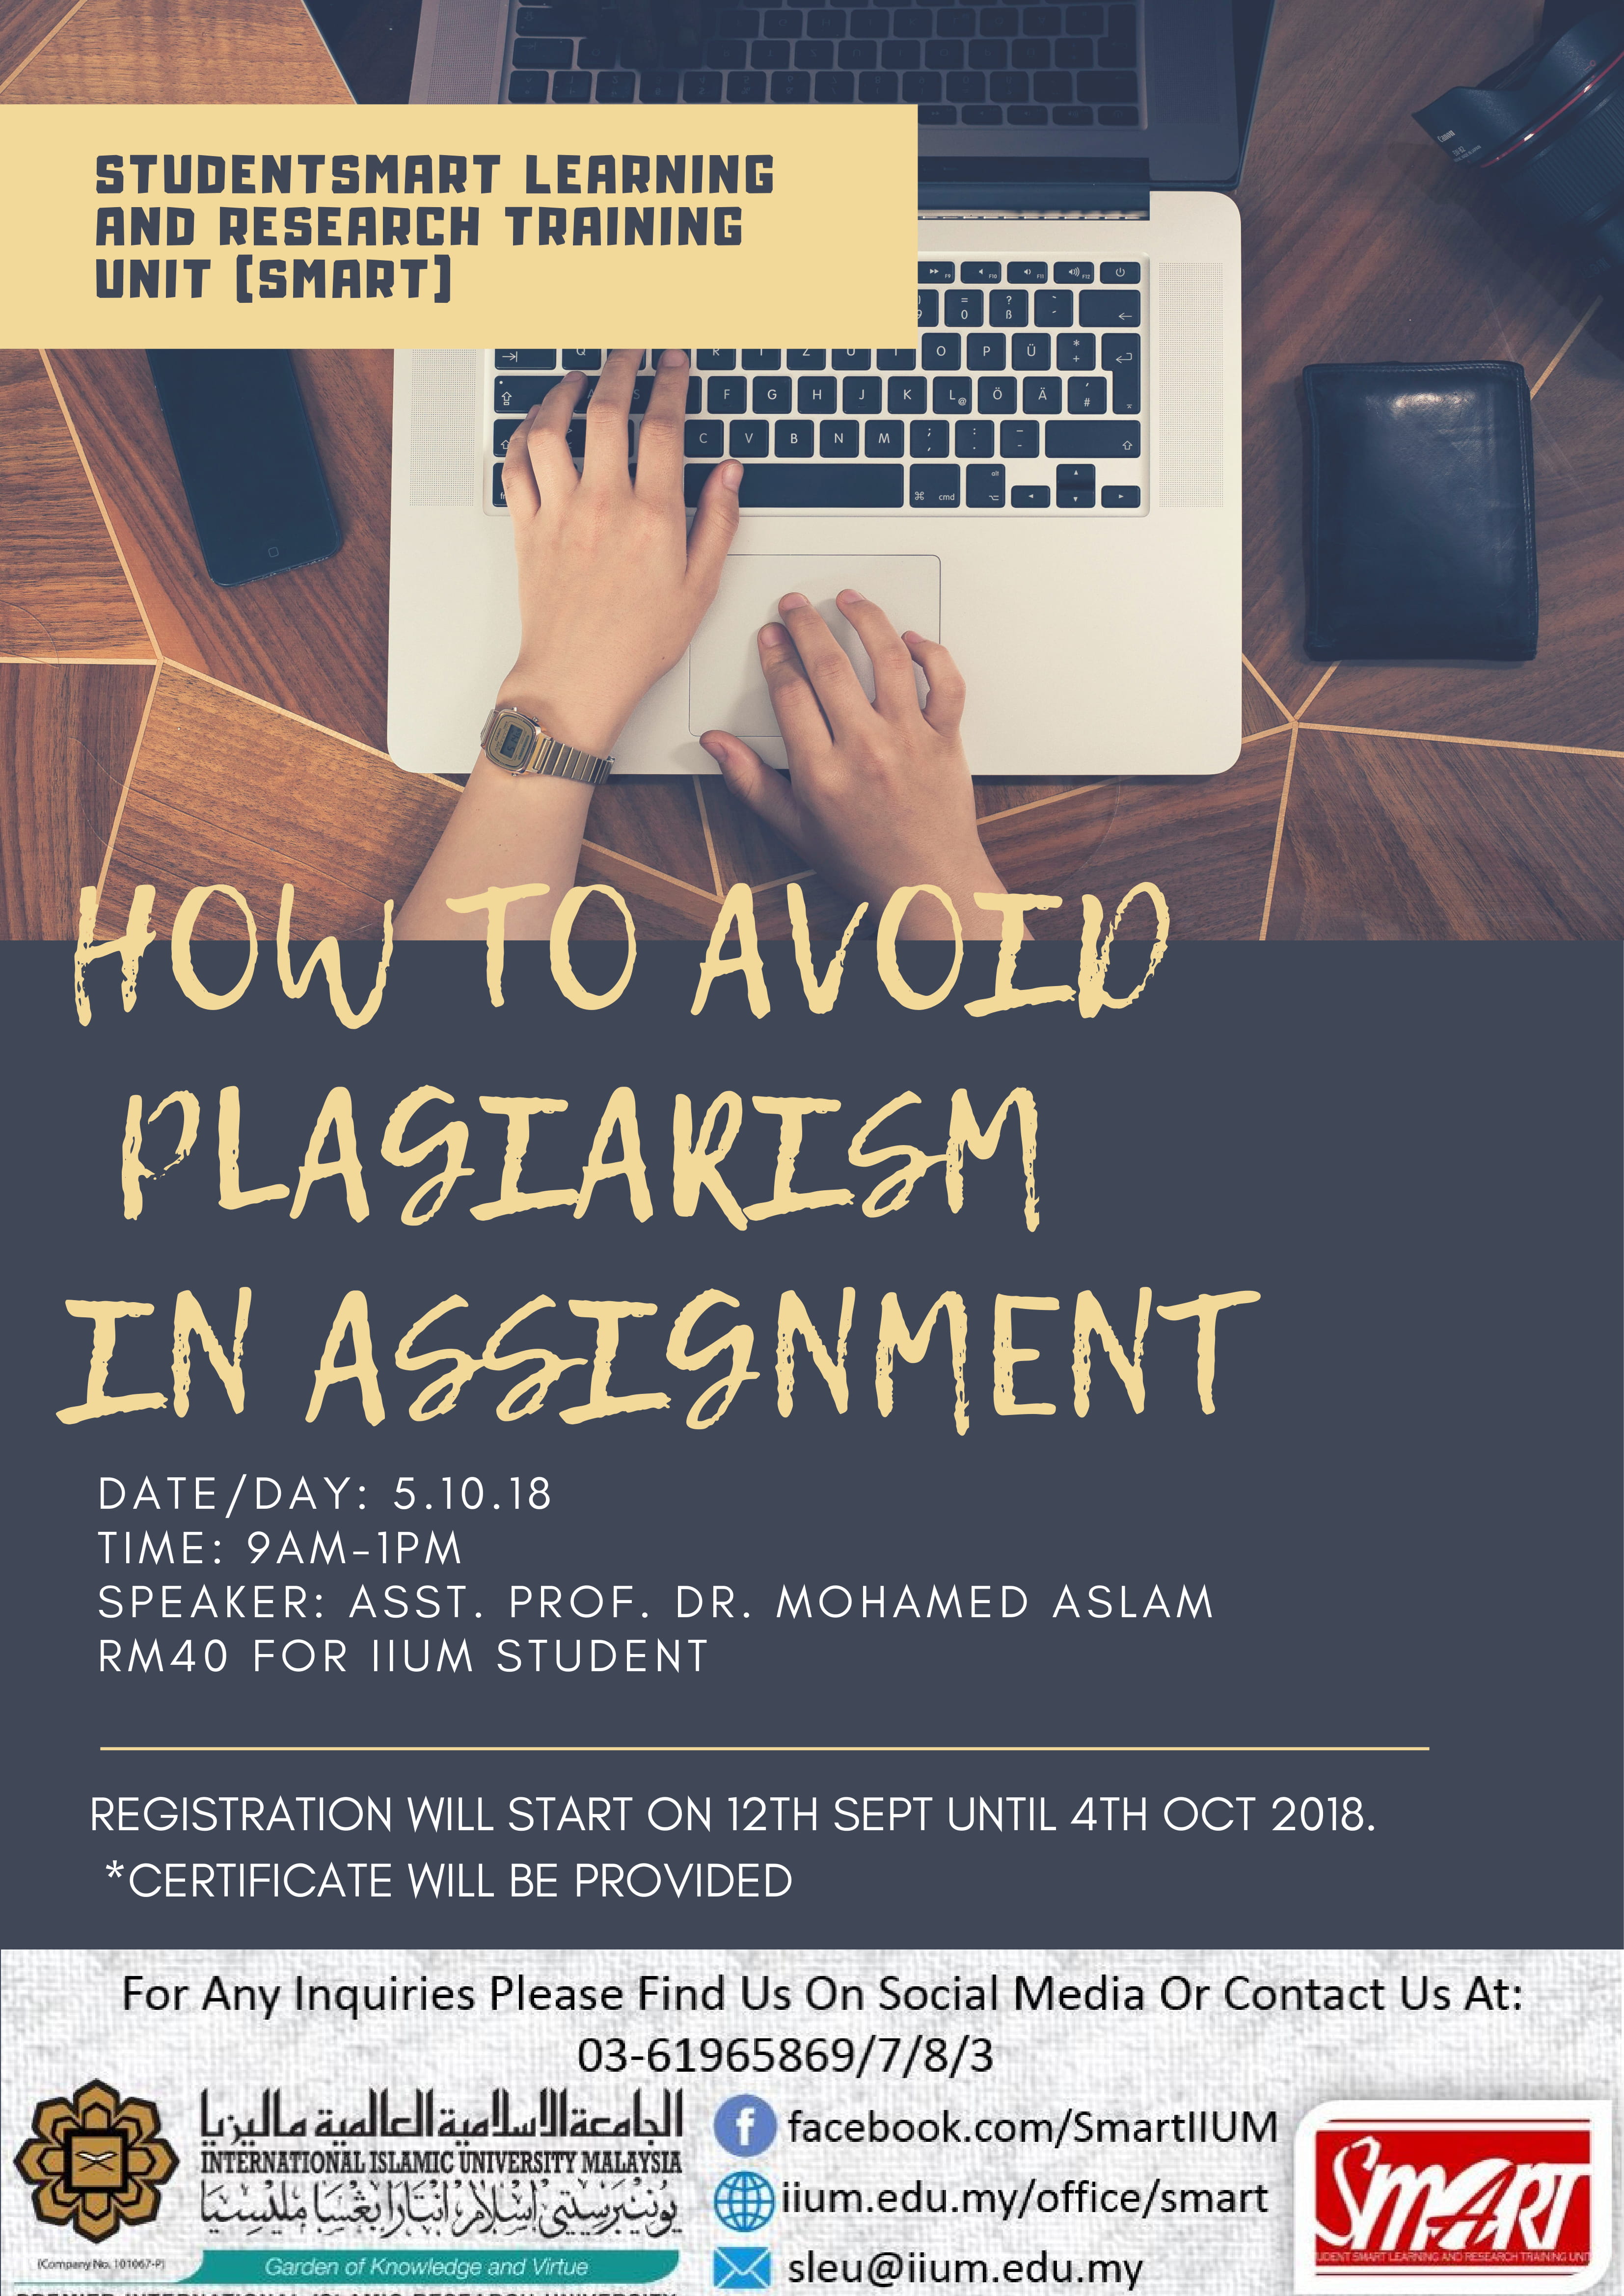 WORKSHOP : HOW TO PLAGIARISM IN ASSIGNMENT